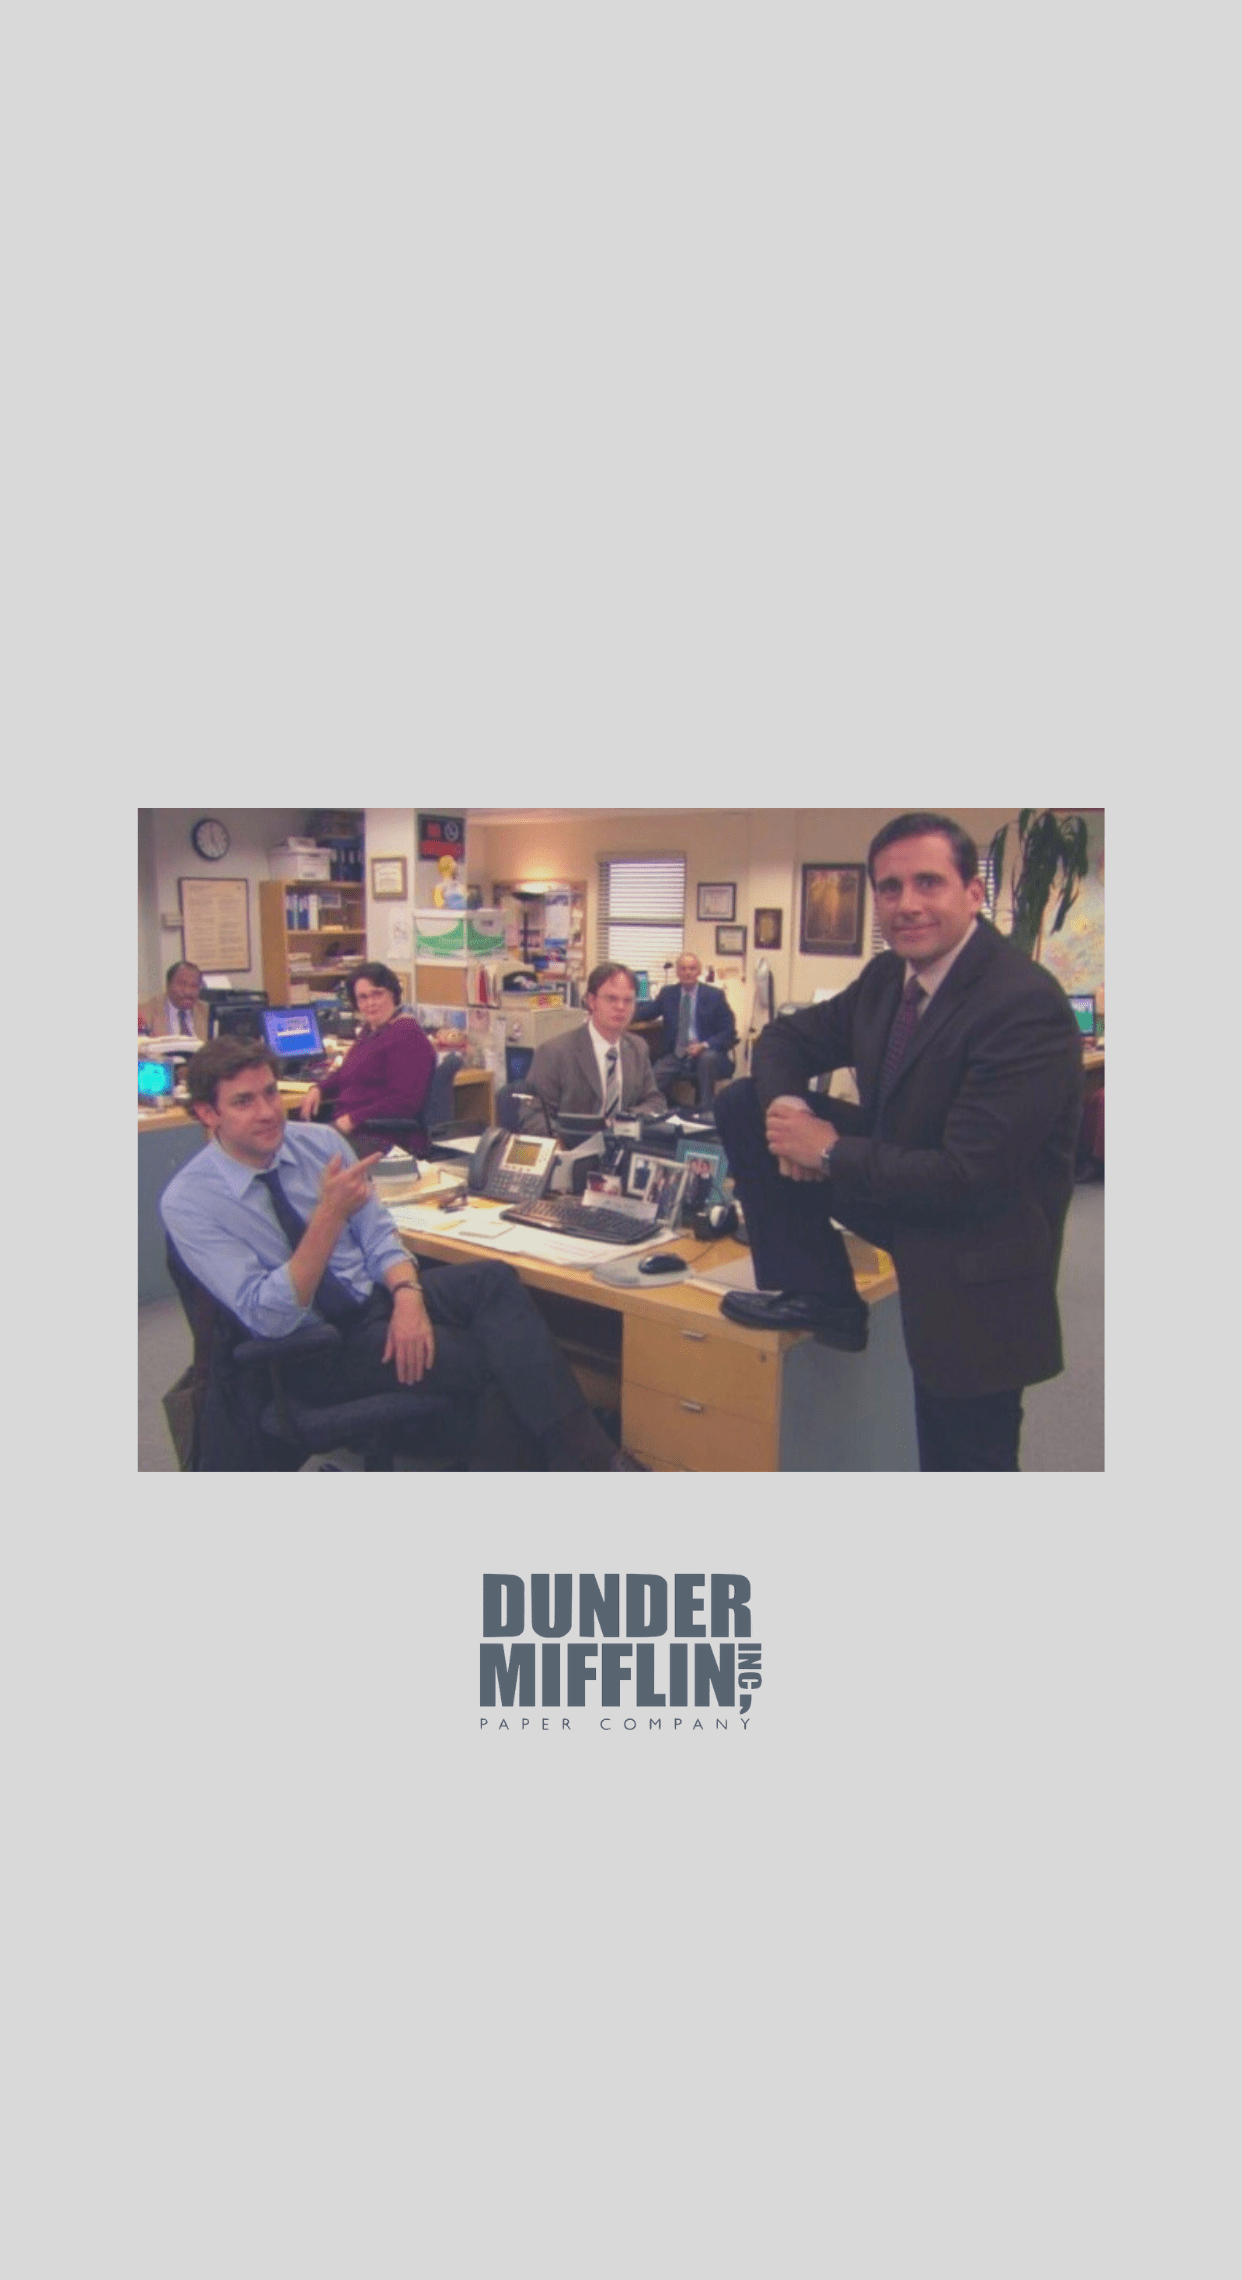 The Office Wallpaper | The office characters, The office jim, The office  show